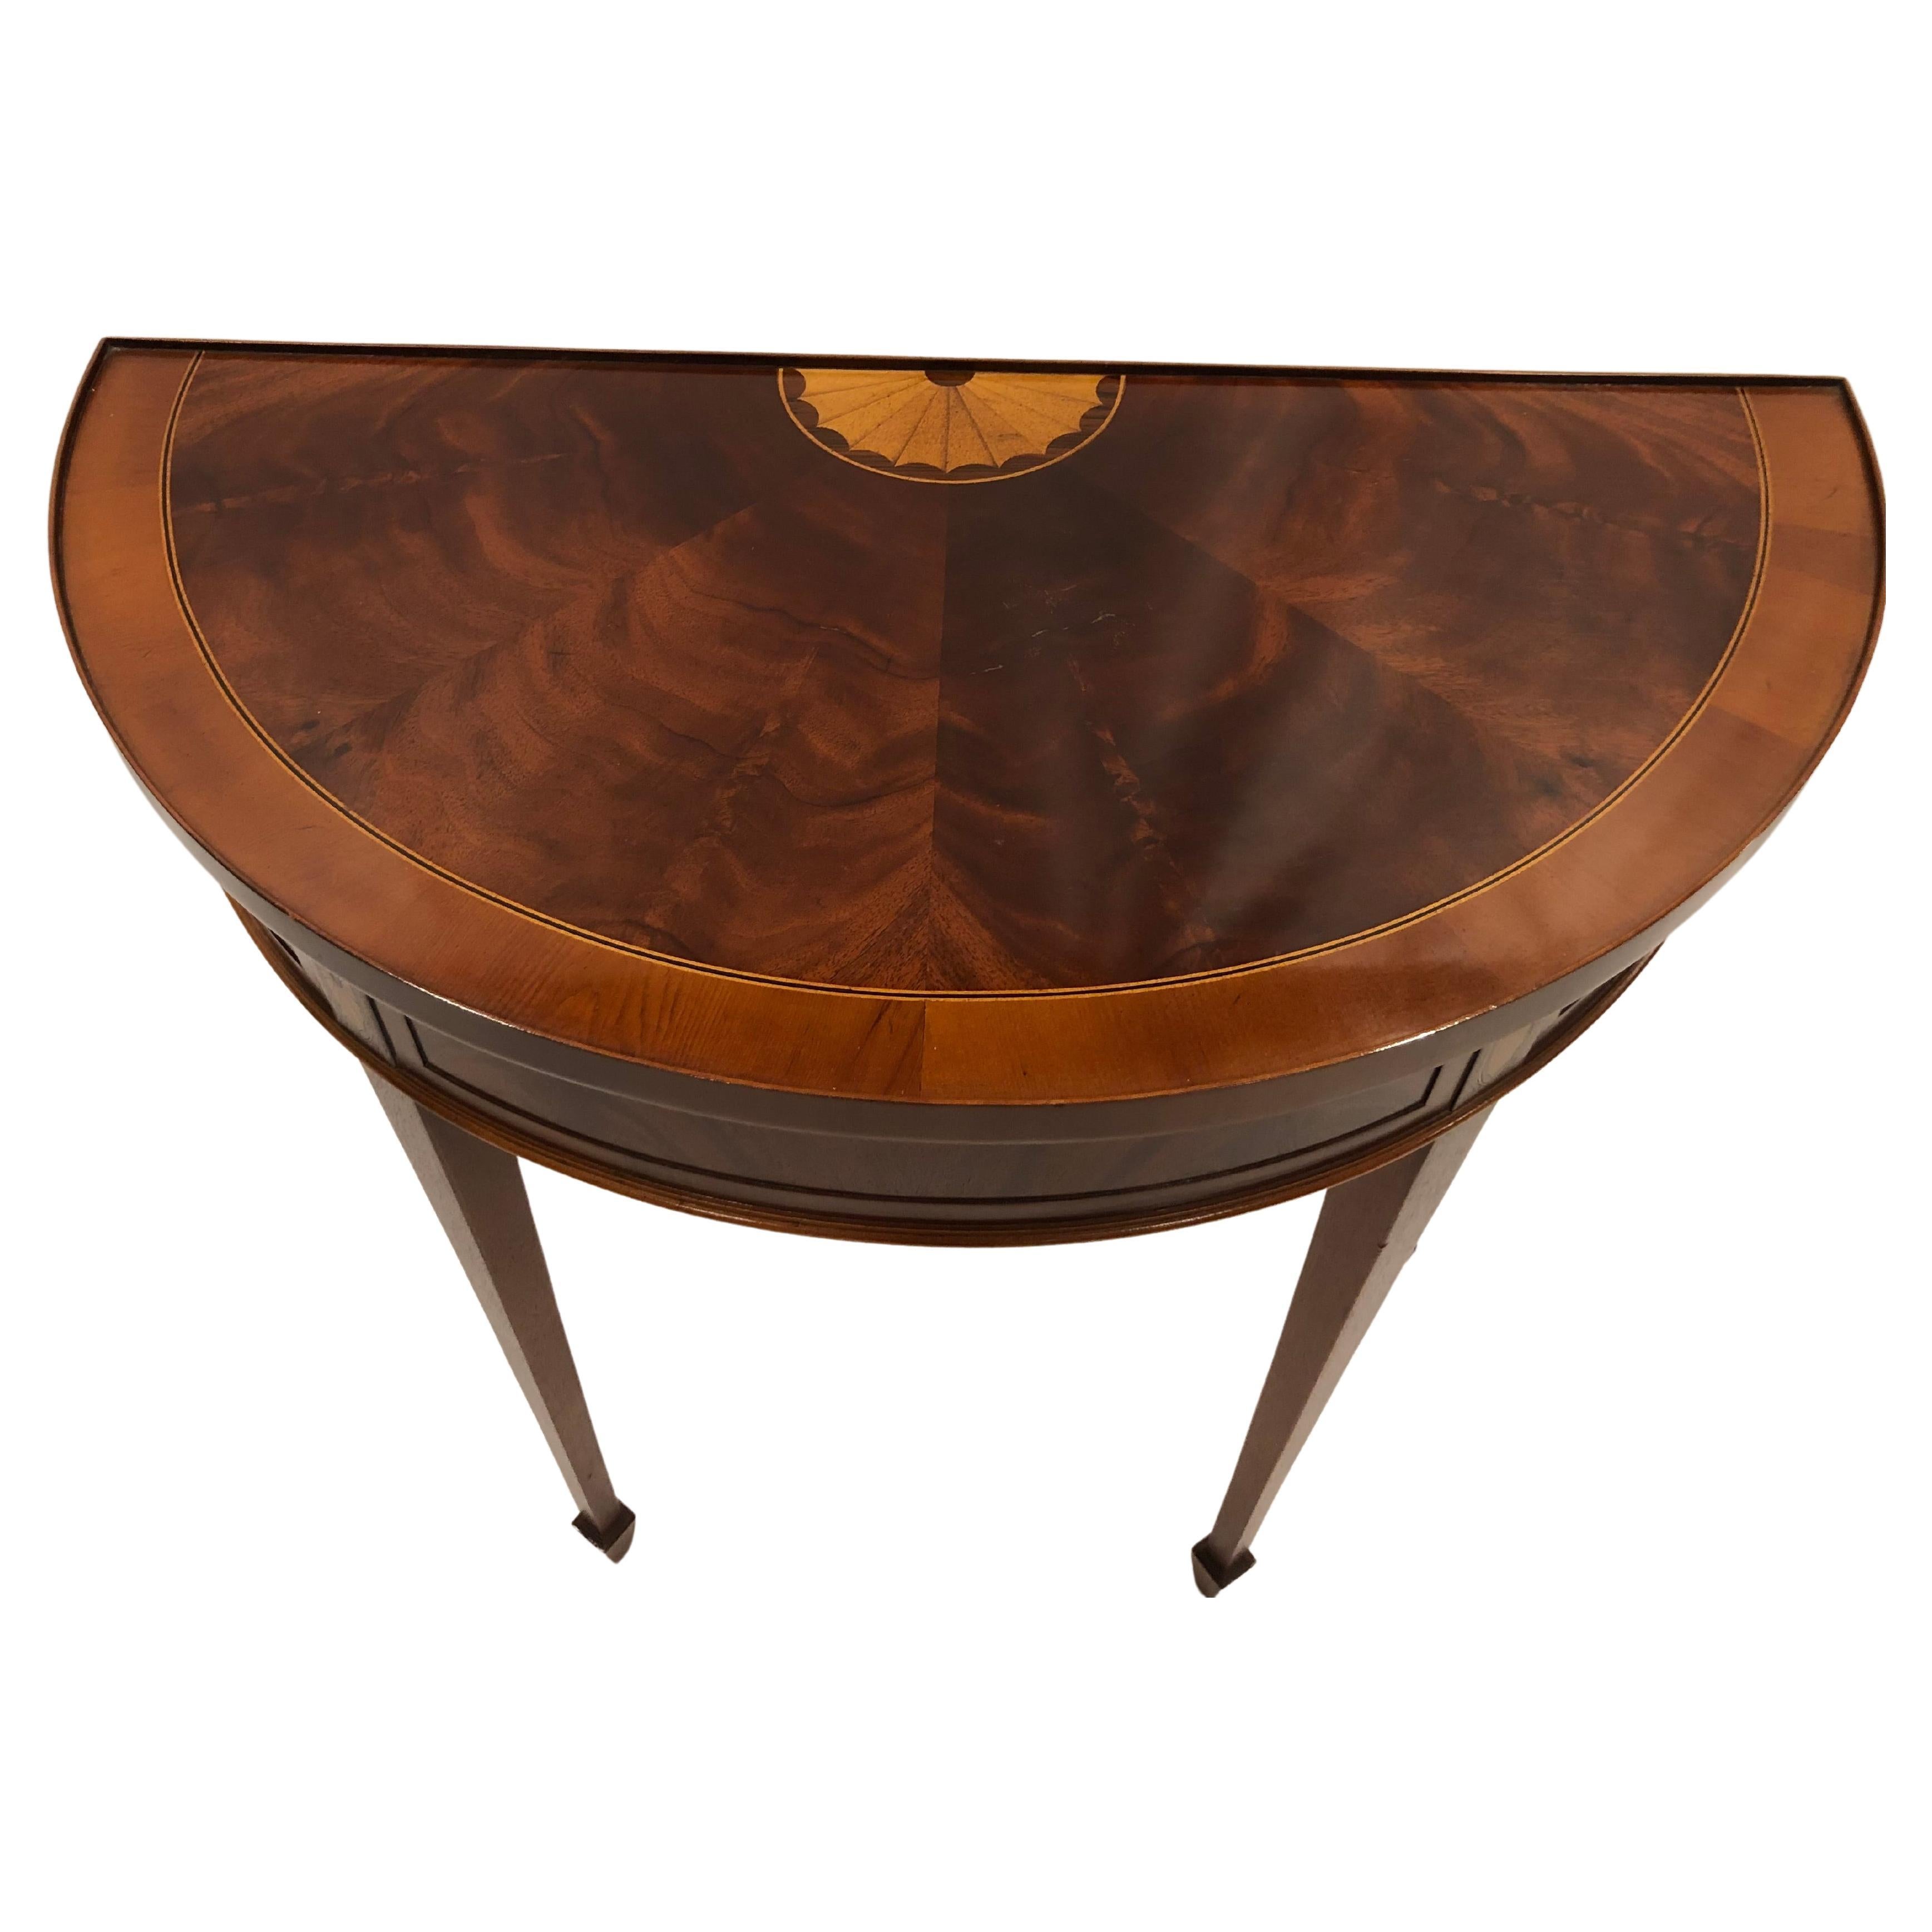 Classic diminutive demilune console having gorgeously grained flame mahogany with fan shaped fruitwood inlay decoration at the back. Tapered elegant legs complete the lovely silhouette.